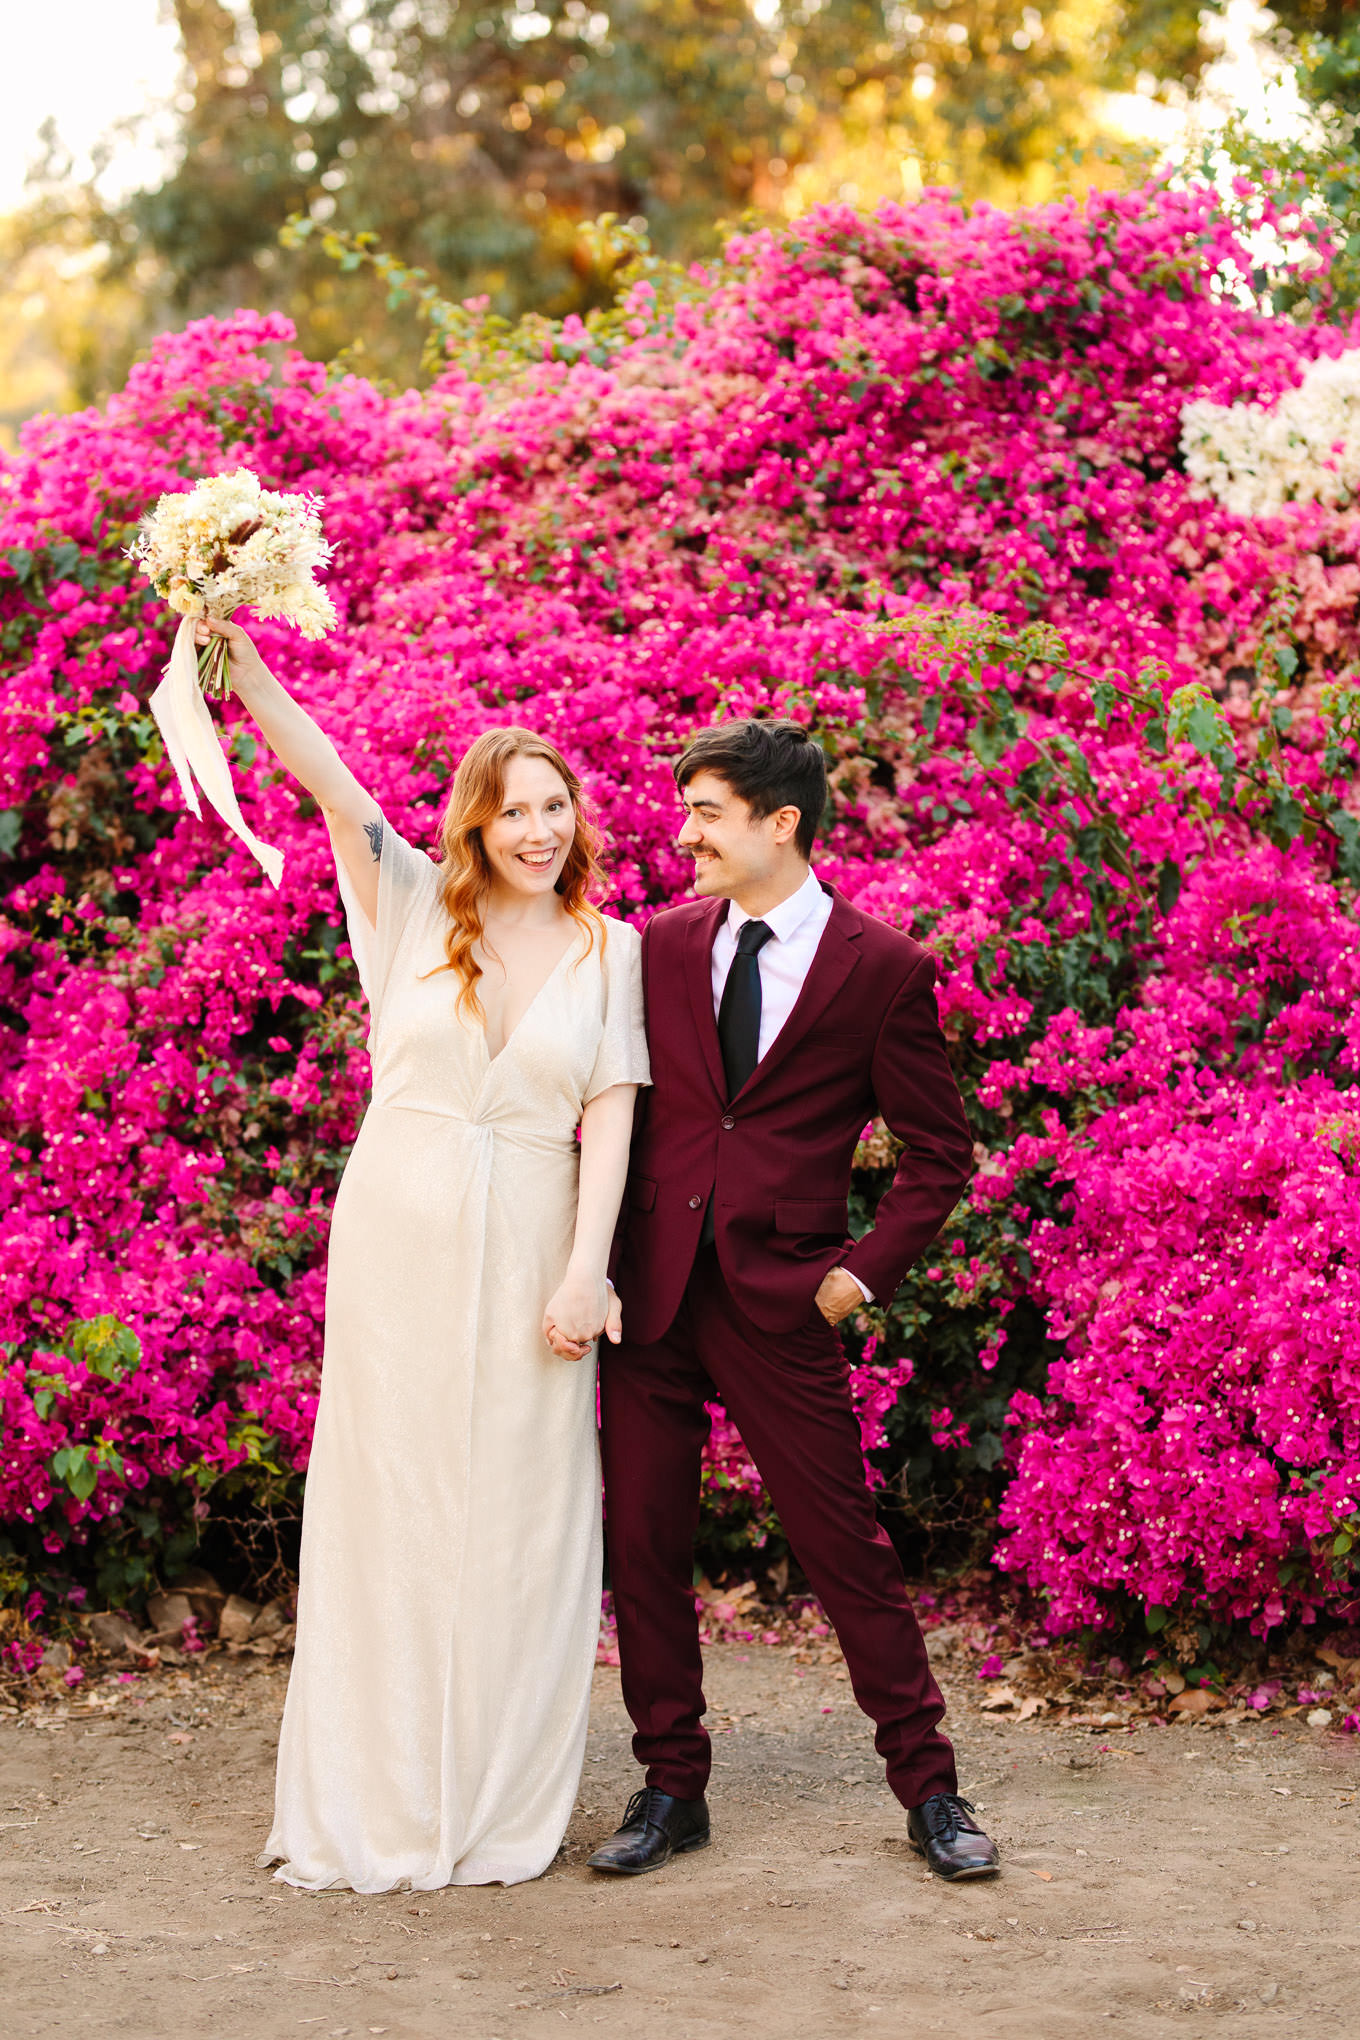 Playful bride and groom in front of lush bougainvillea | Los Angeles Arboretum Elopement | Colorful and elevated wedding photography for fun-loving couples in Southern California | #LosAngelesElopement #elopement #LAarboretum #LAskyline #elopementphotos   Source: Mary Costa Photography | Los Angeles